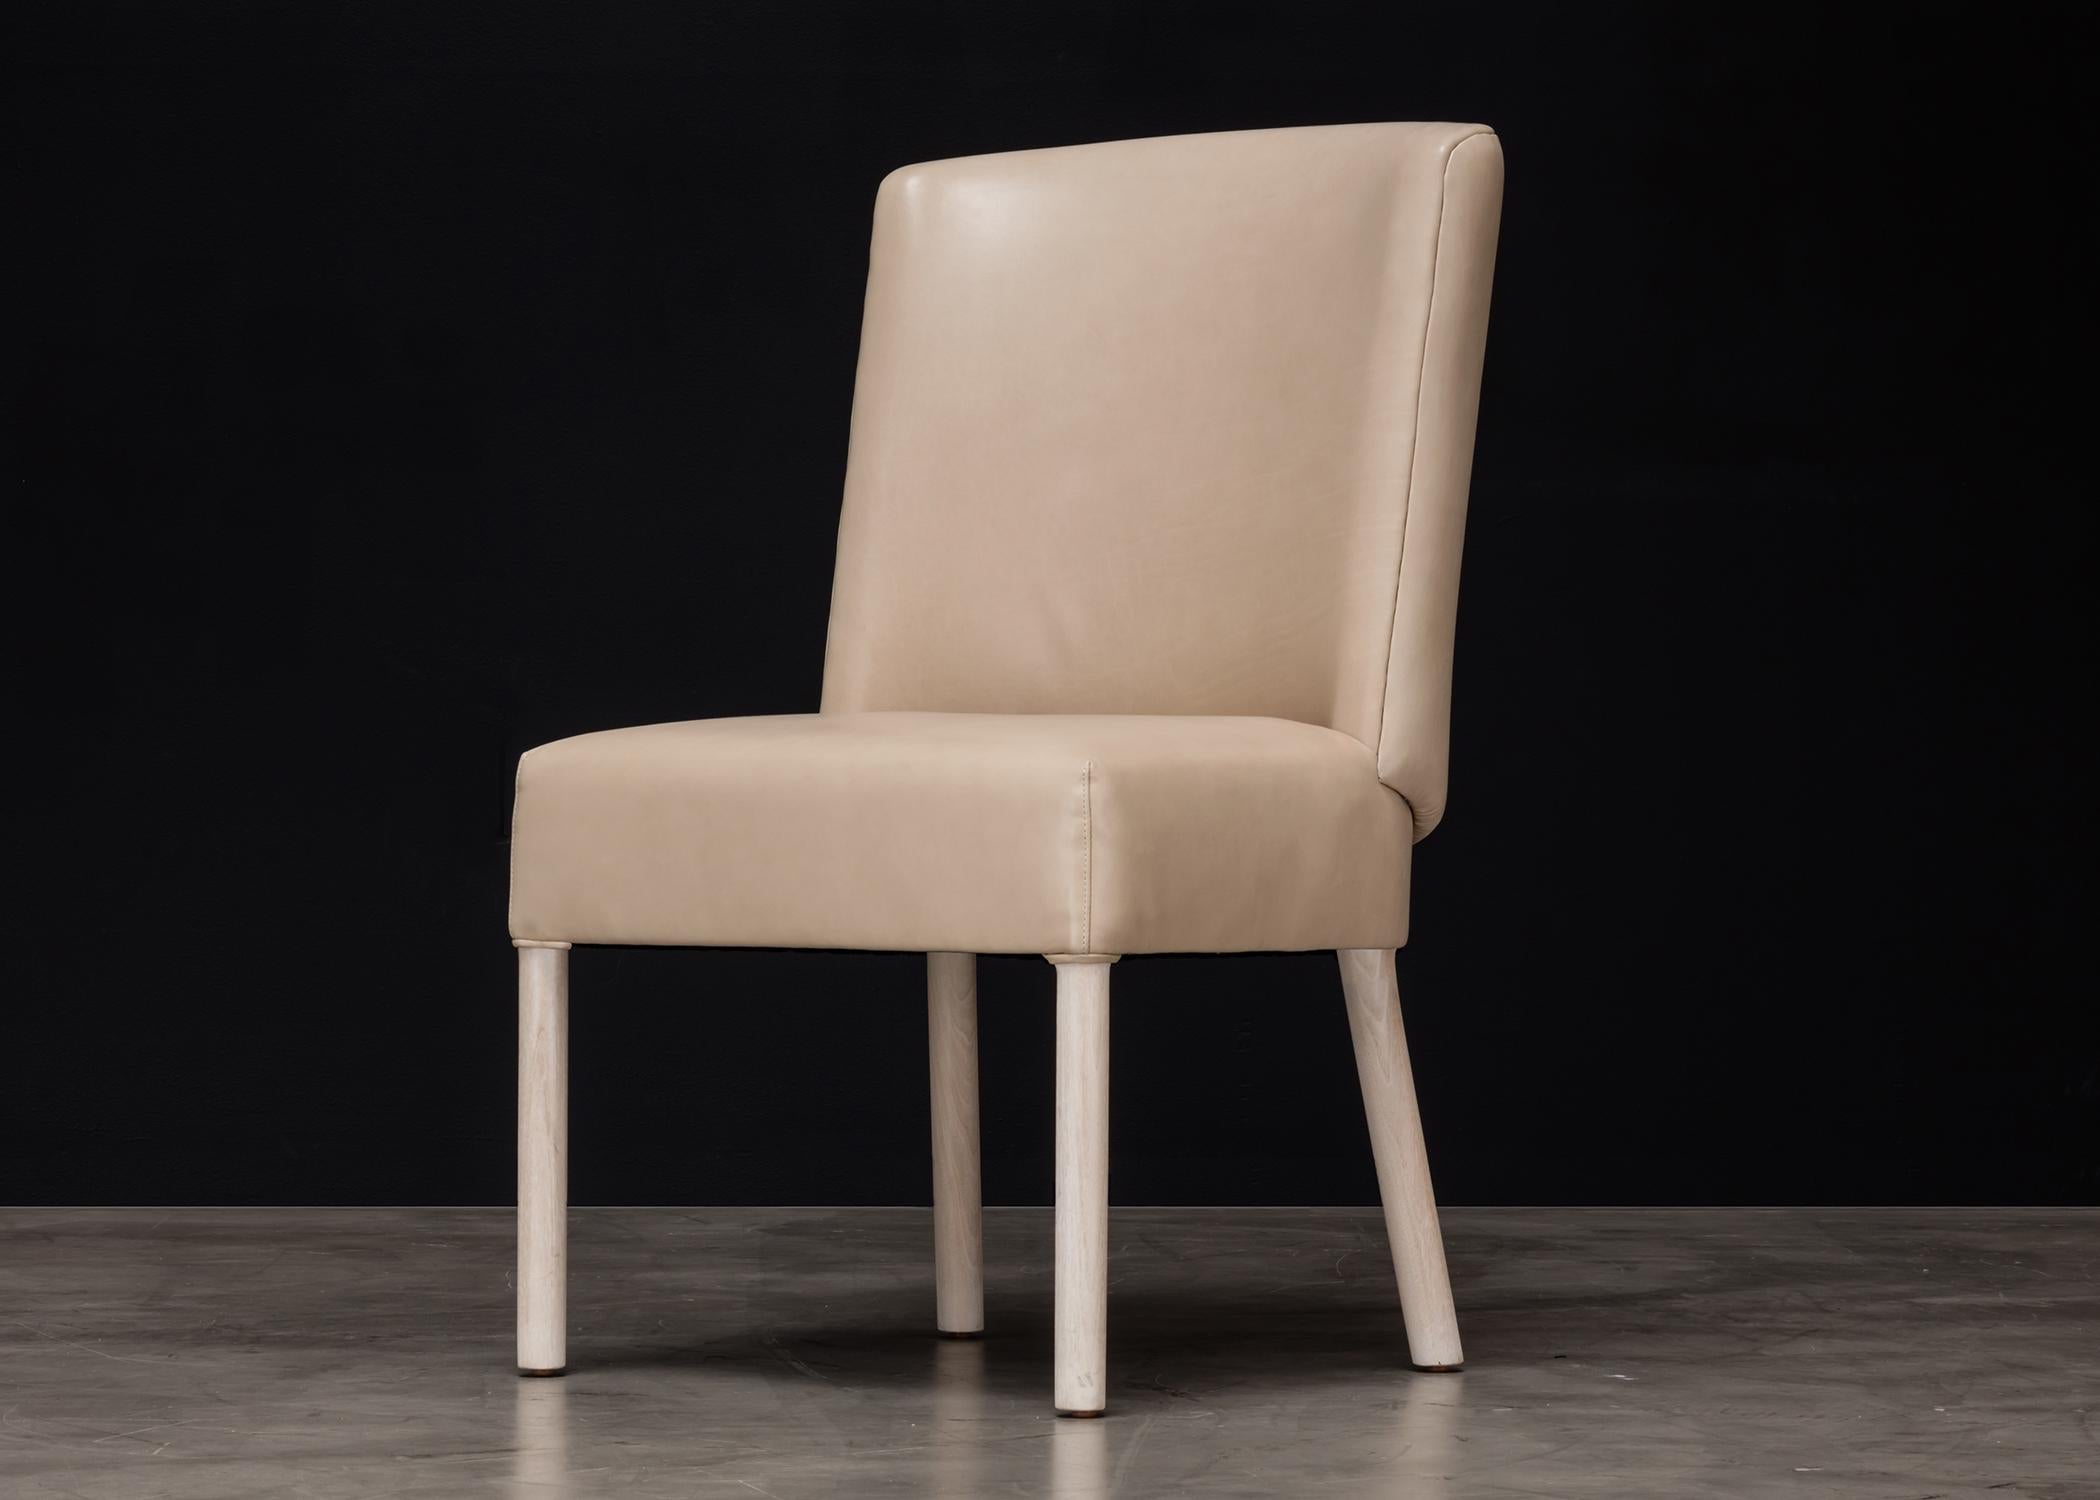 The Curve Dining Chair is a stylish and comfortable piece of furniture designed with a modern aesthetic. It features sweeping lines that add a sense of elegance and sophistication to any dining space. This chair is not only visually appealing but